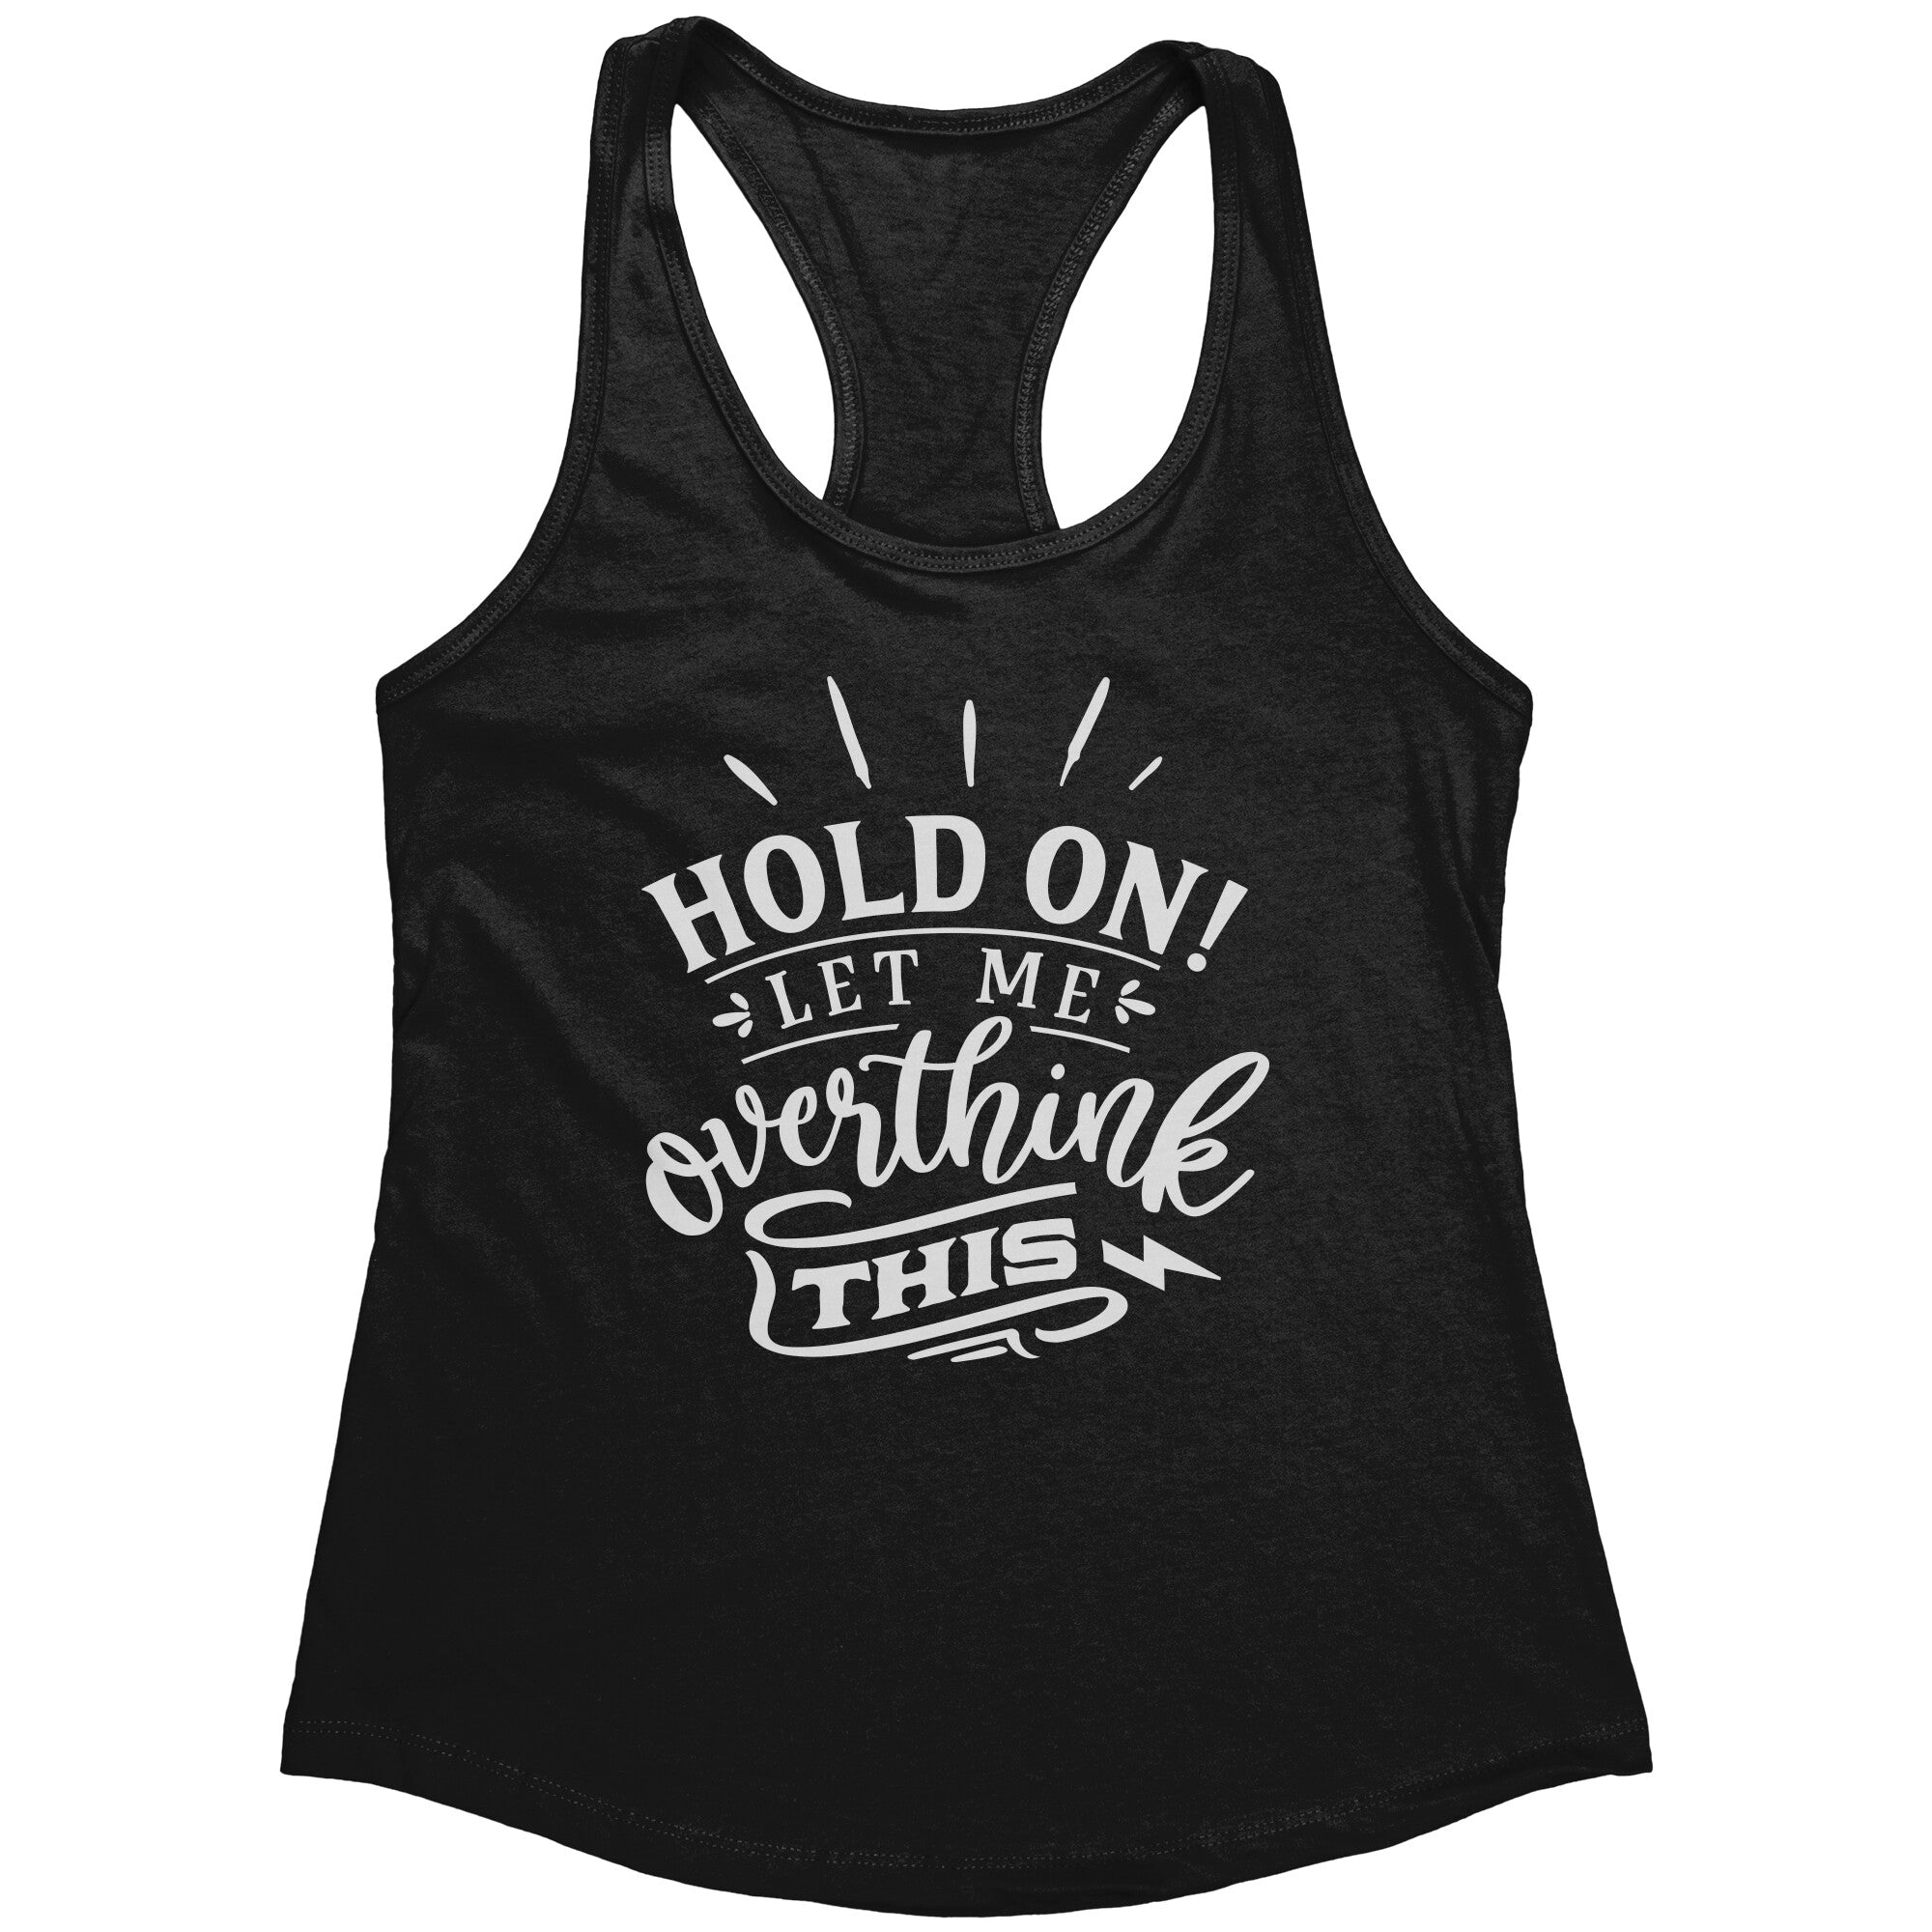 Hold On Let Me Overthink This (Ladies) -Apparel | Drunk America 